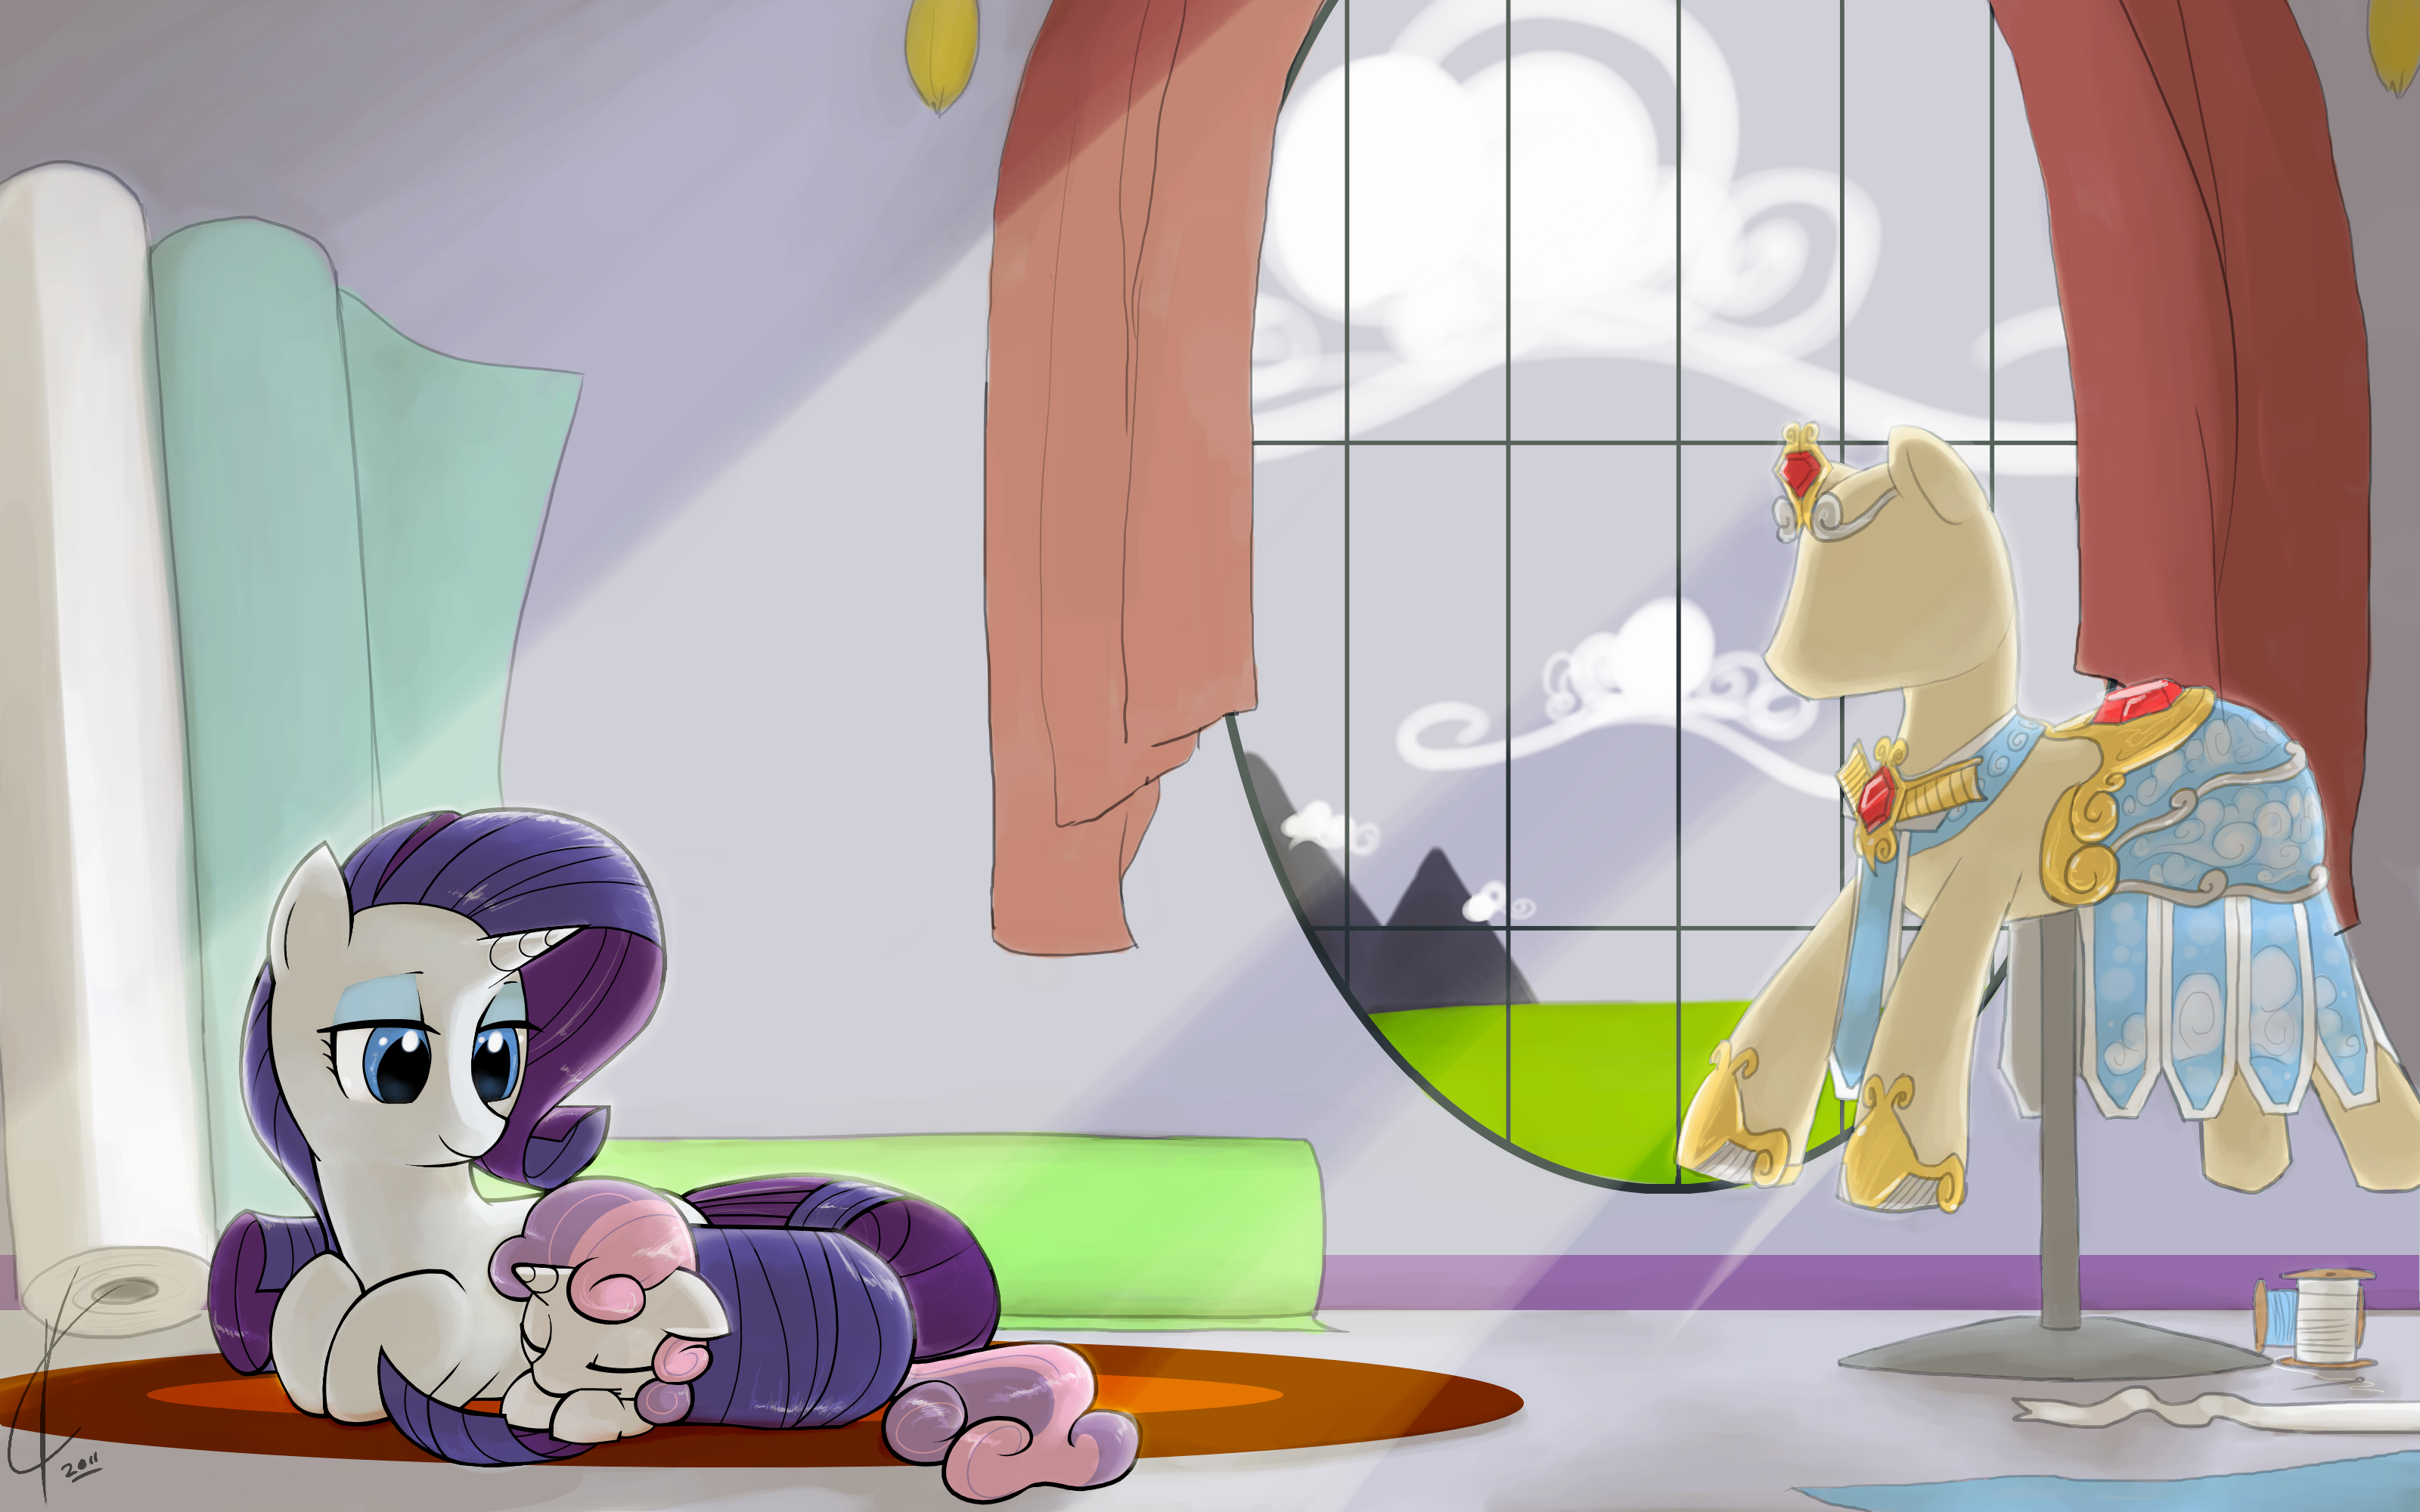 Noontime nap. by Dreatos